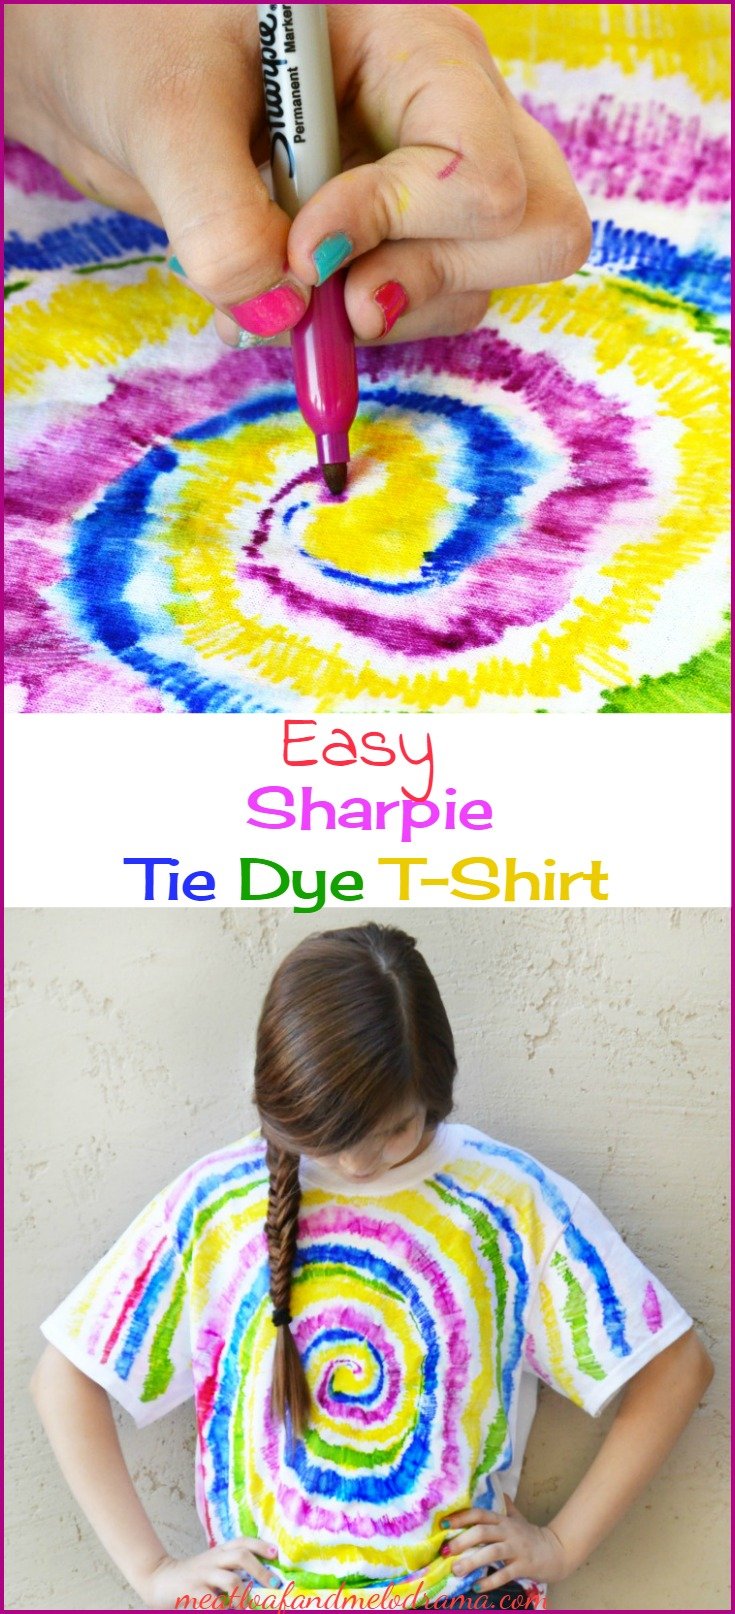 Easy and Fun DIY Sharpie T-Shirts